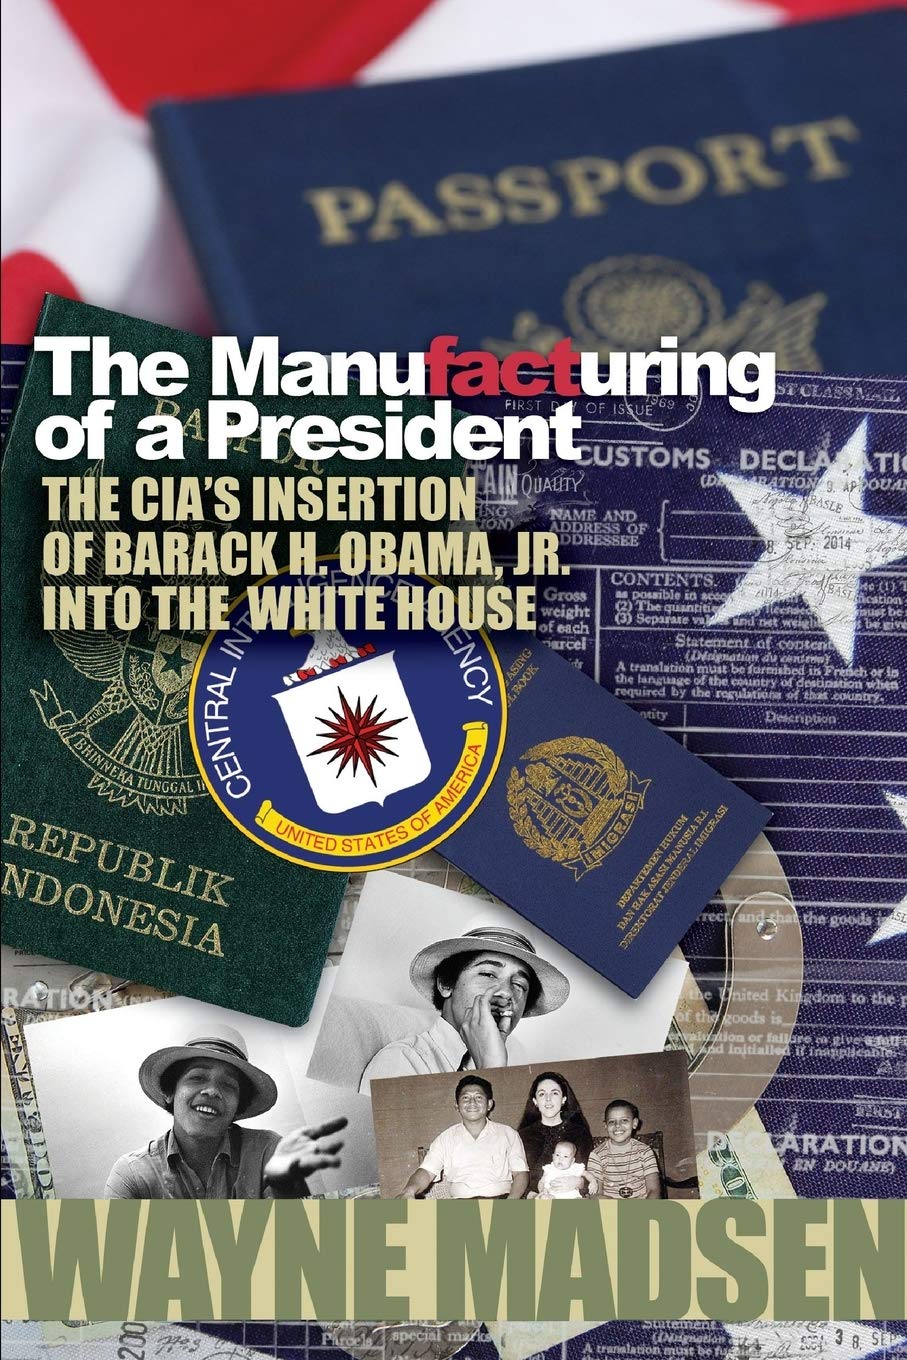 The Manufacturing of a President: The CIA's Insertion of Barack Obama into the White House [book]